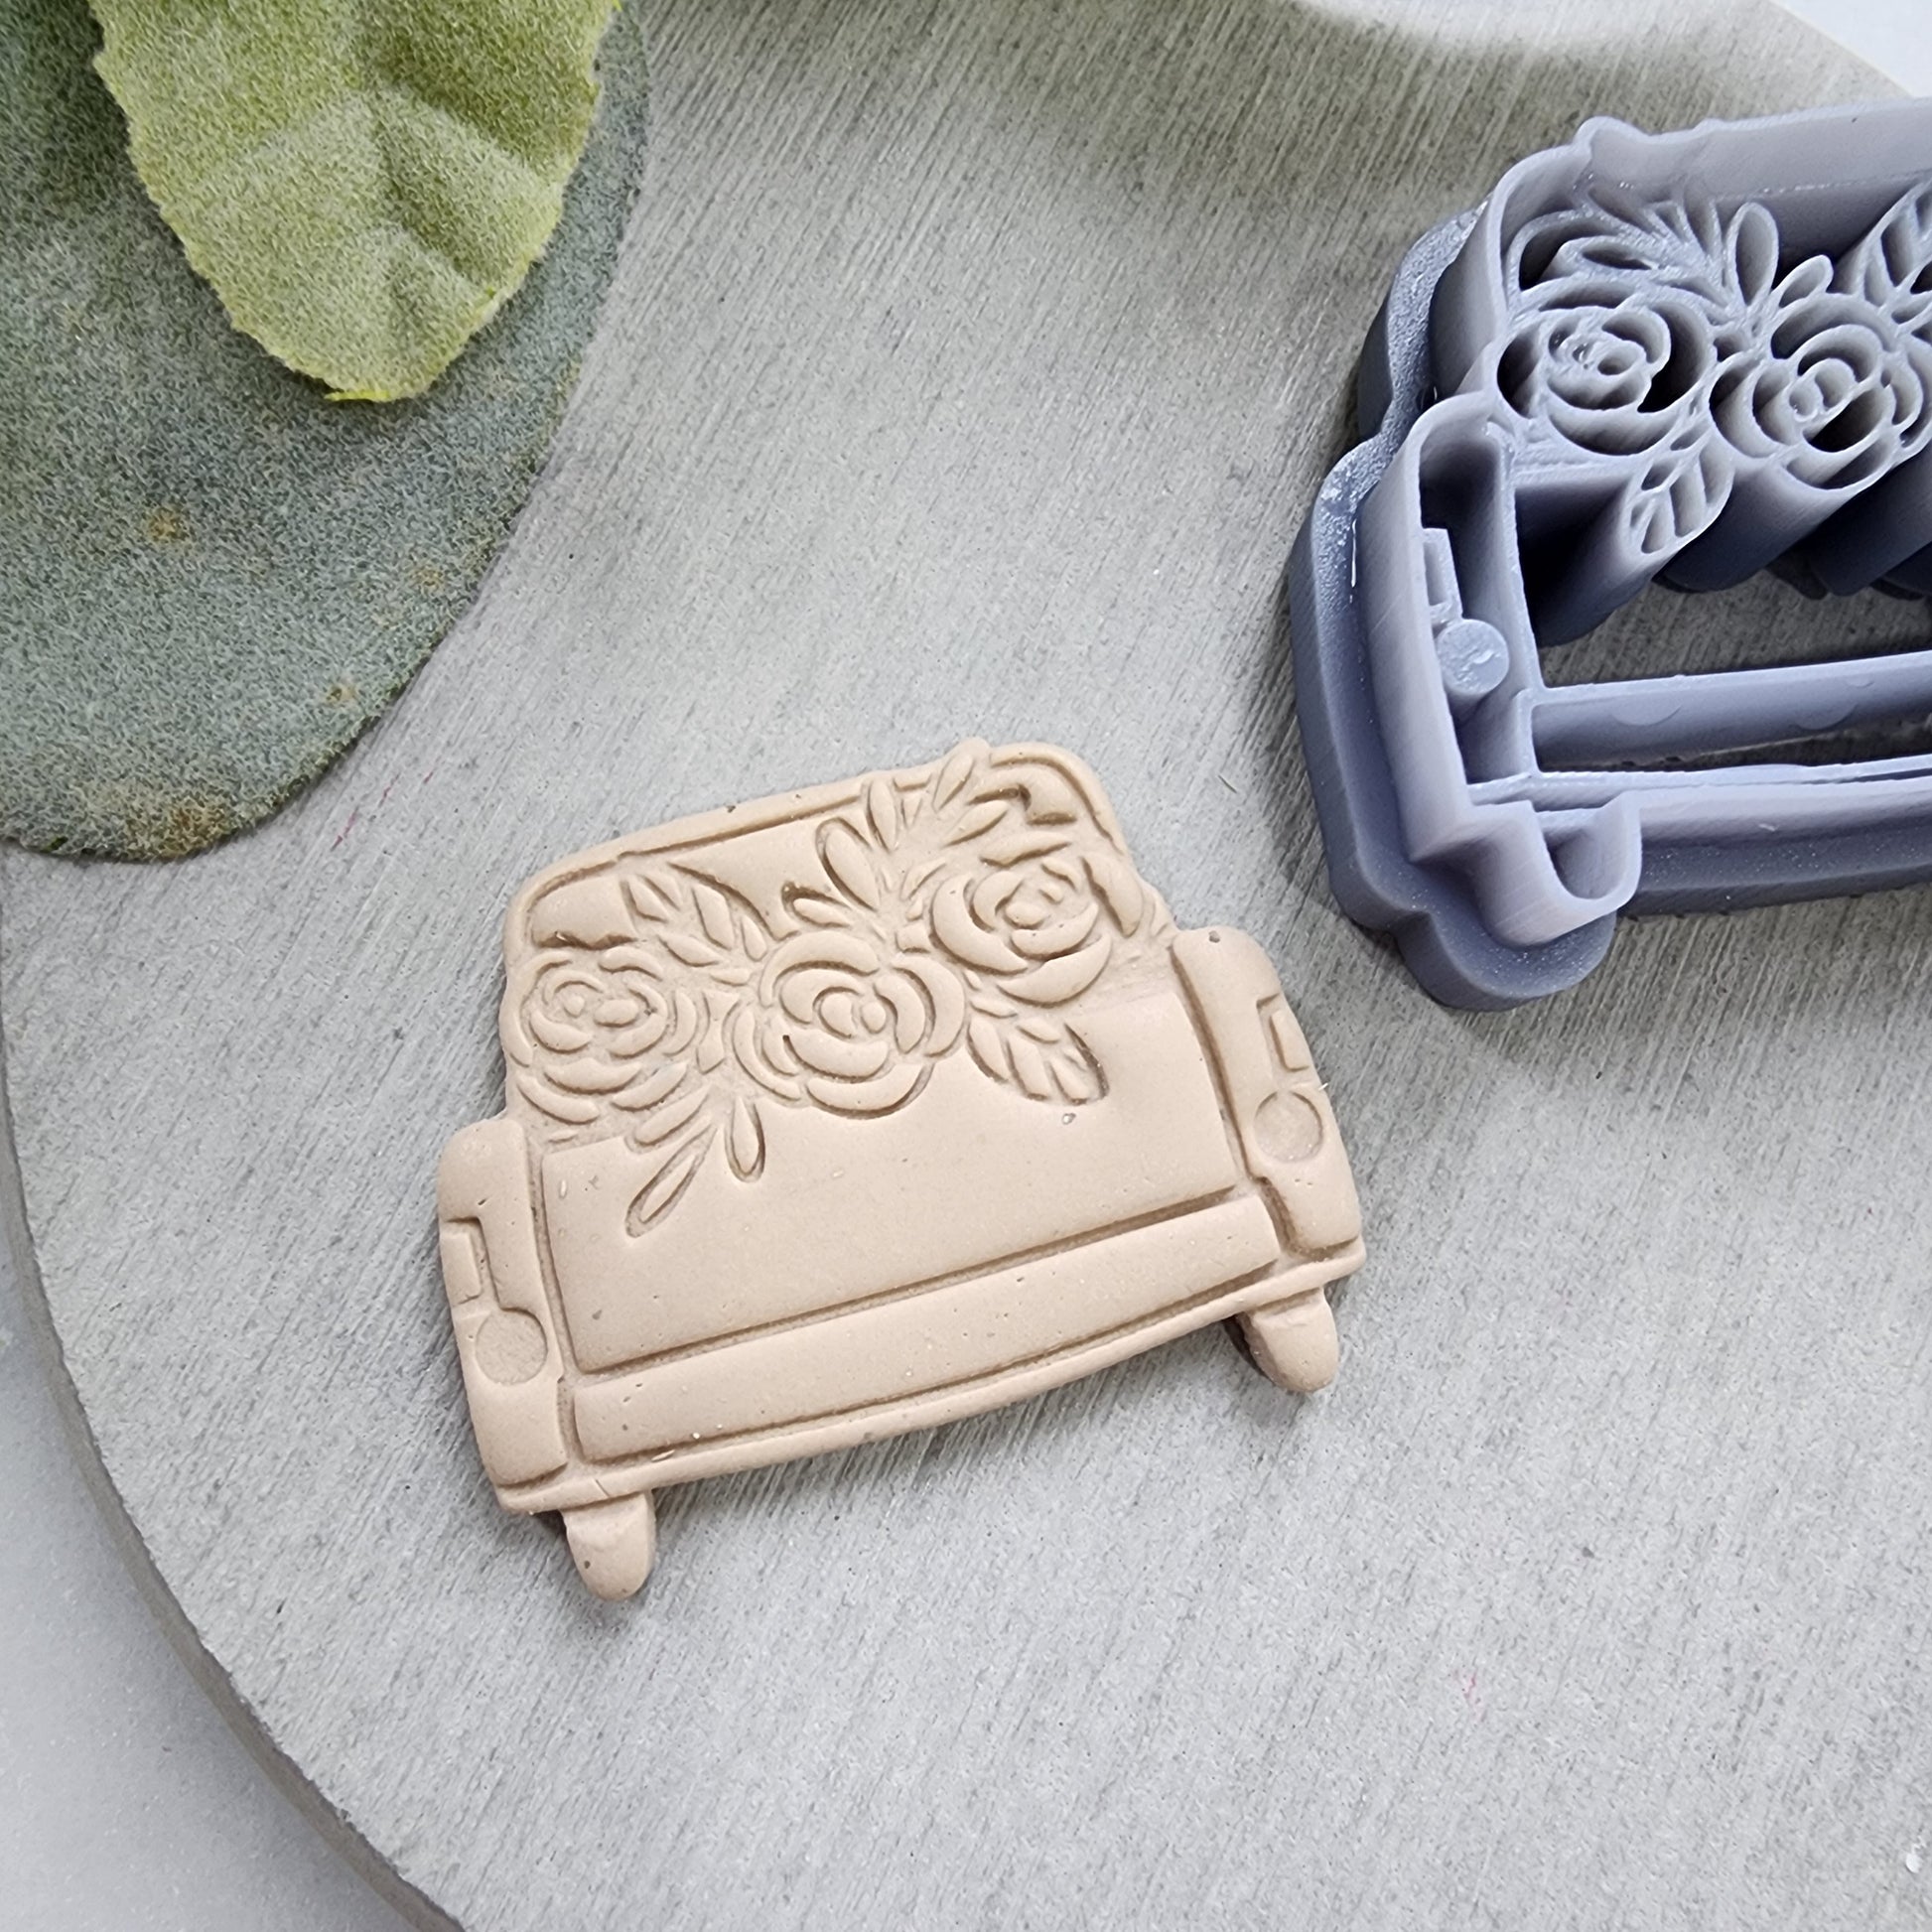 Polymer Clay cutters Stud earrings clay cutters Earrings mold Polymer clay tools "Flower car"sharp cutter stamp Jewelry cutter Clay supplies